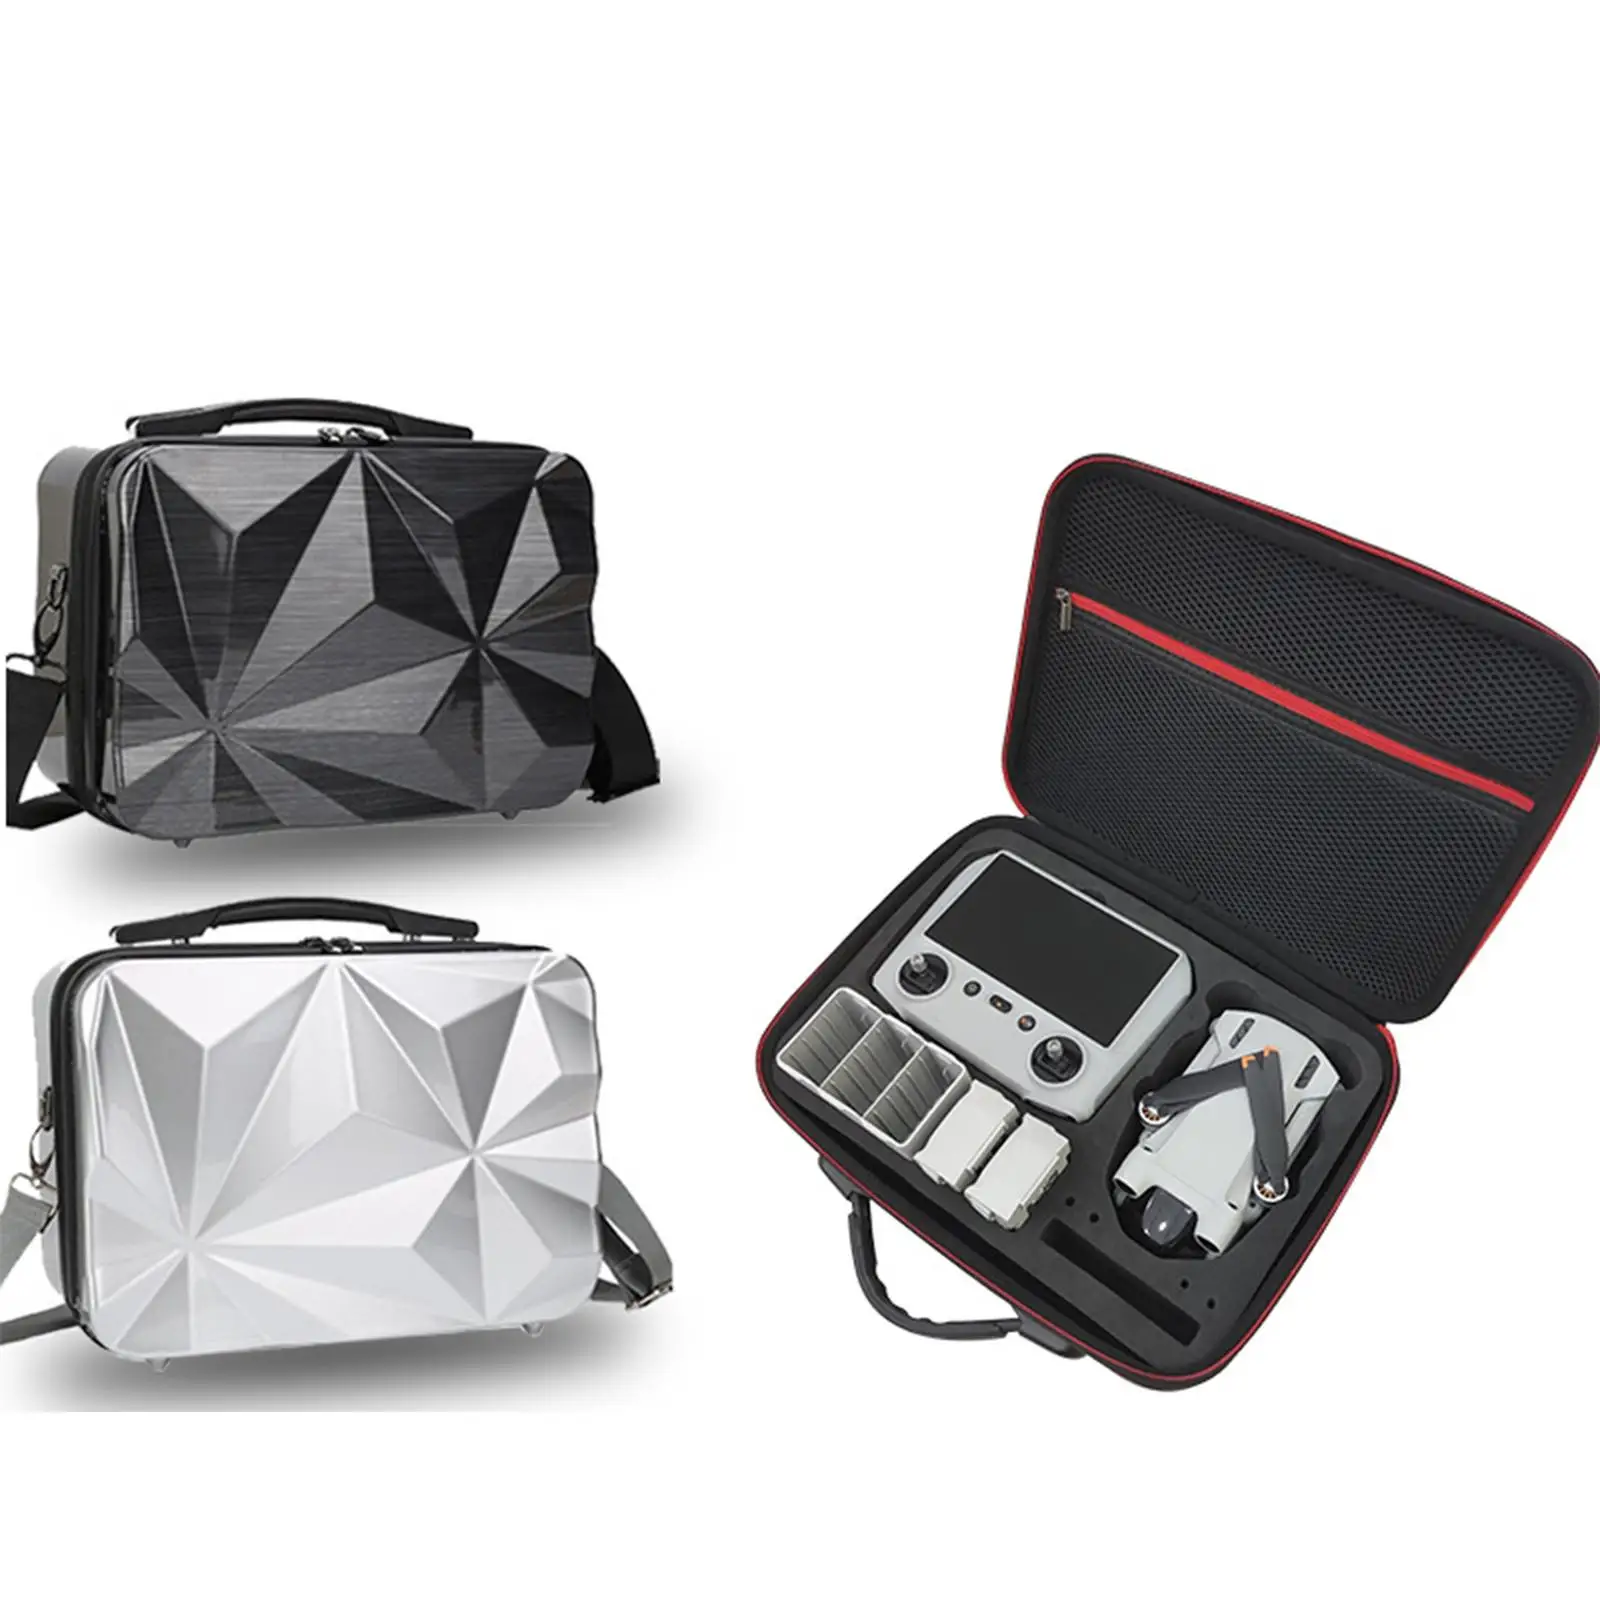 Hard Carrying Case with Mesh Pocket for Travel for Mini 3 Pro